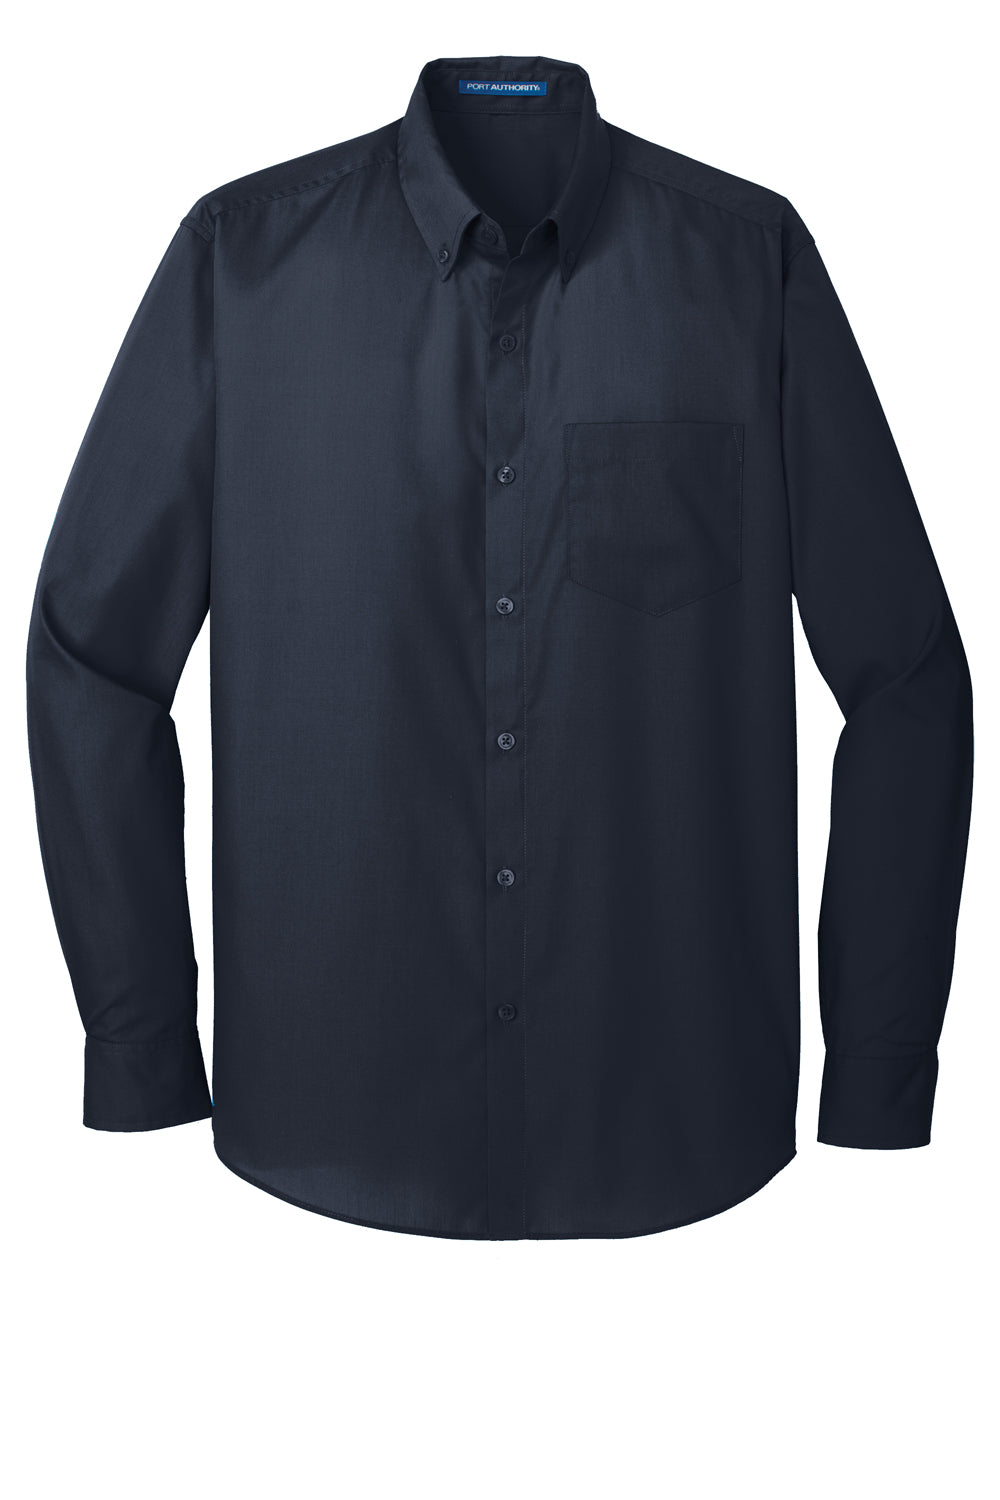 Port Authority W100/TW100 Carefree Stain Resistant Long Sleeve Button Down Shirt w/ Pocket River Navy Blue Flat Front